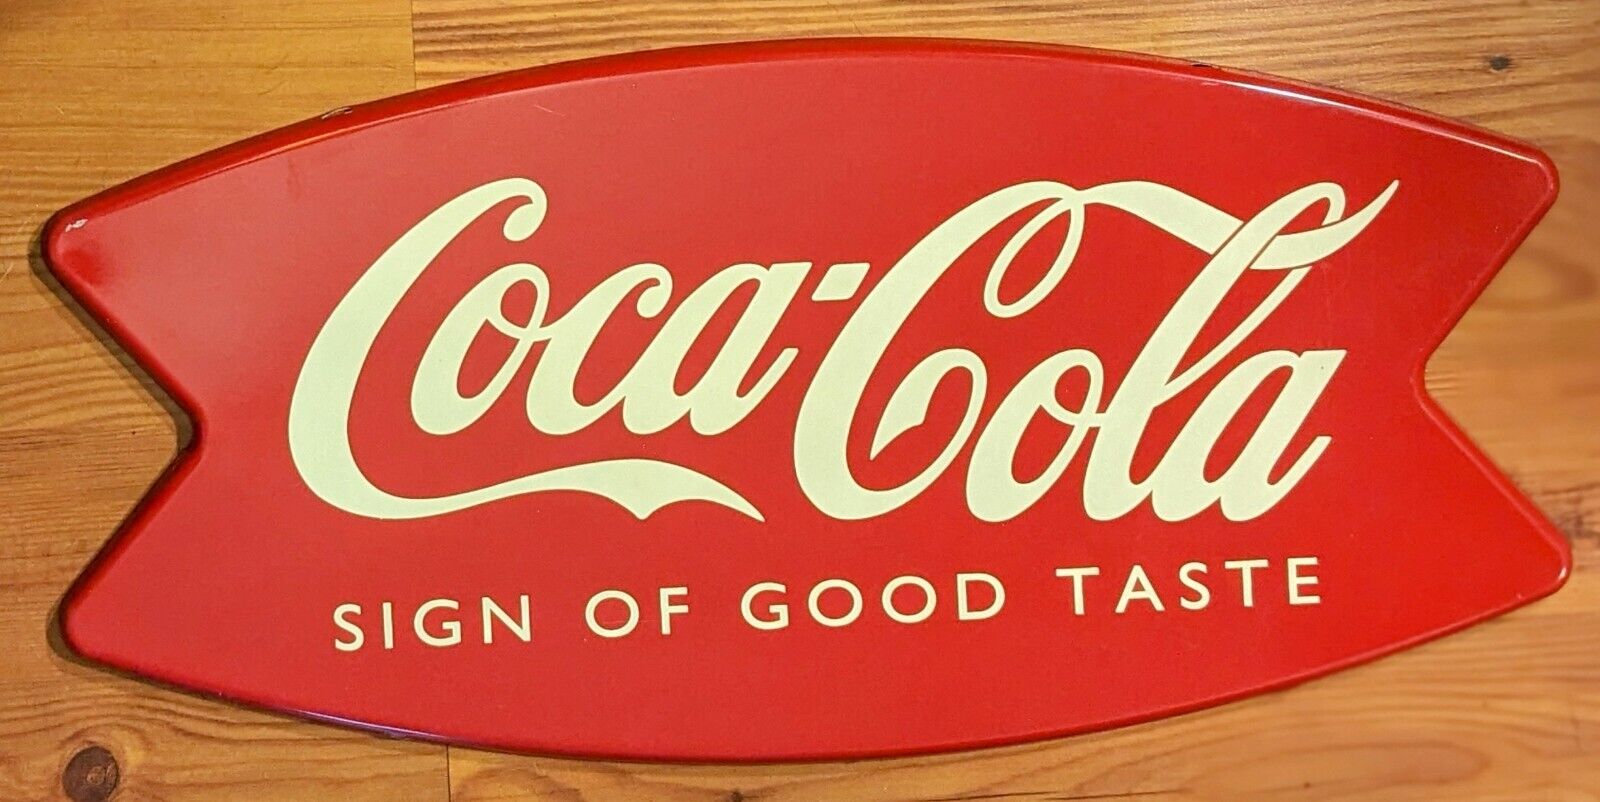 Coca Cola Sign Of Good Taste Fishtail Metal Sign Soda Advertising 24\'\' Official